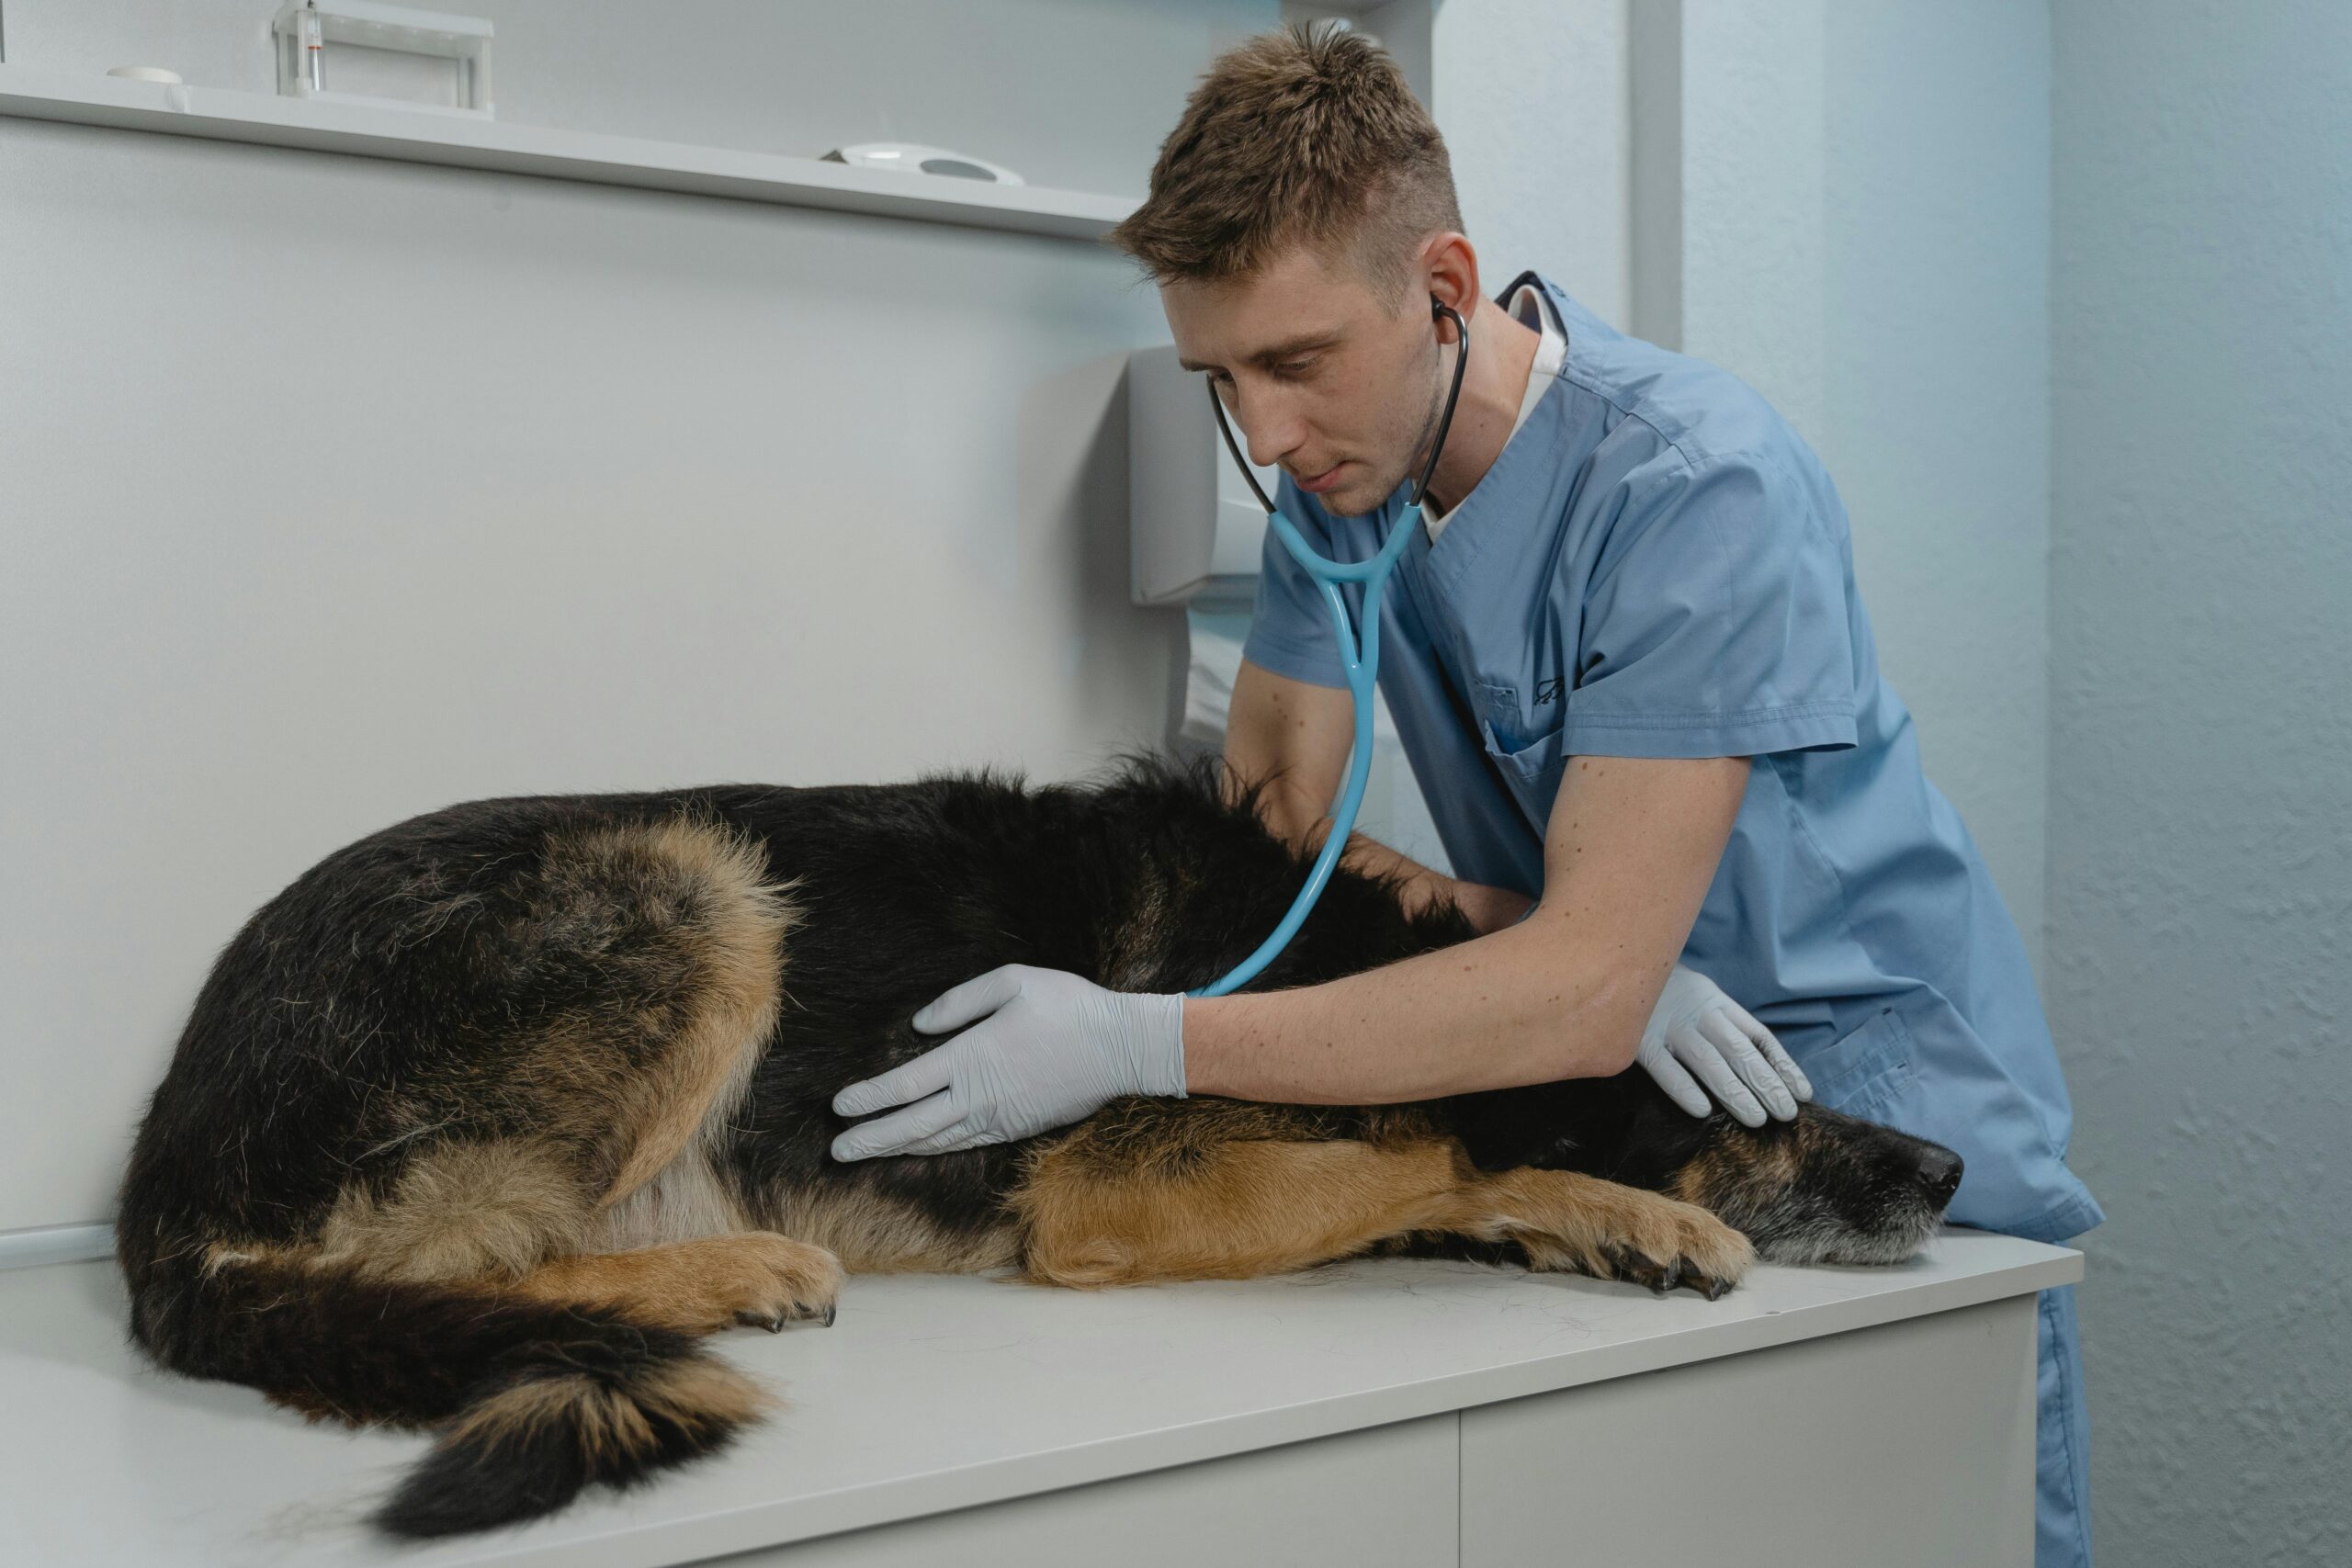 german shepherd health guide: common issues and preventive care